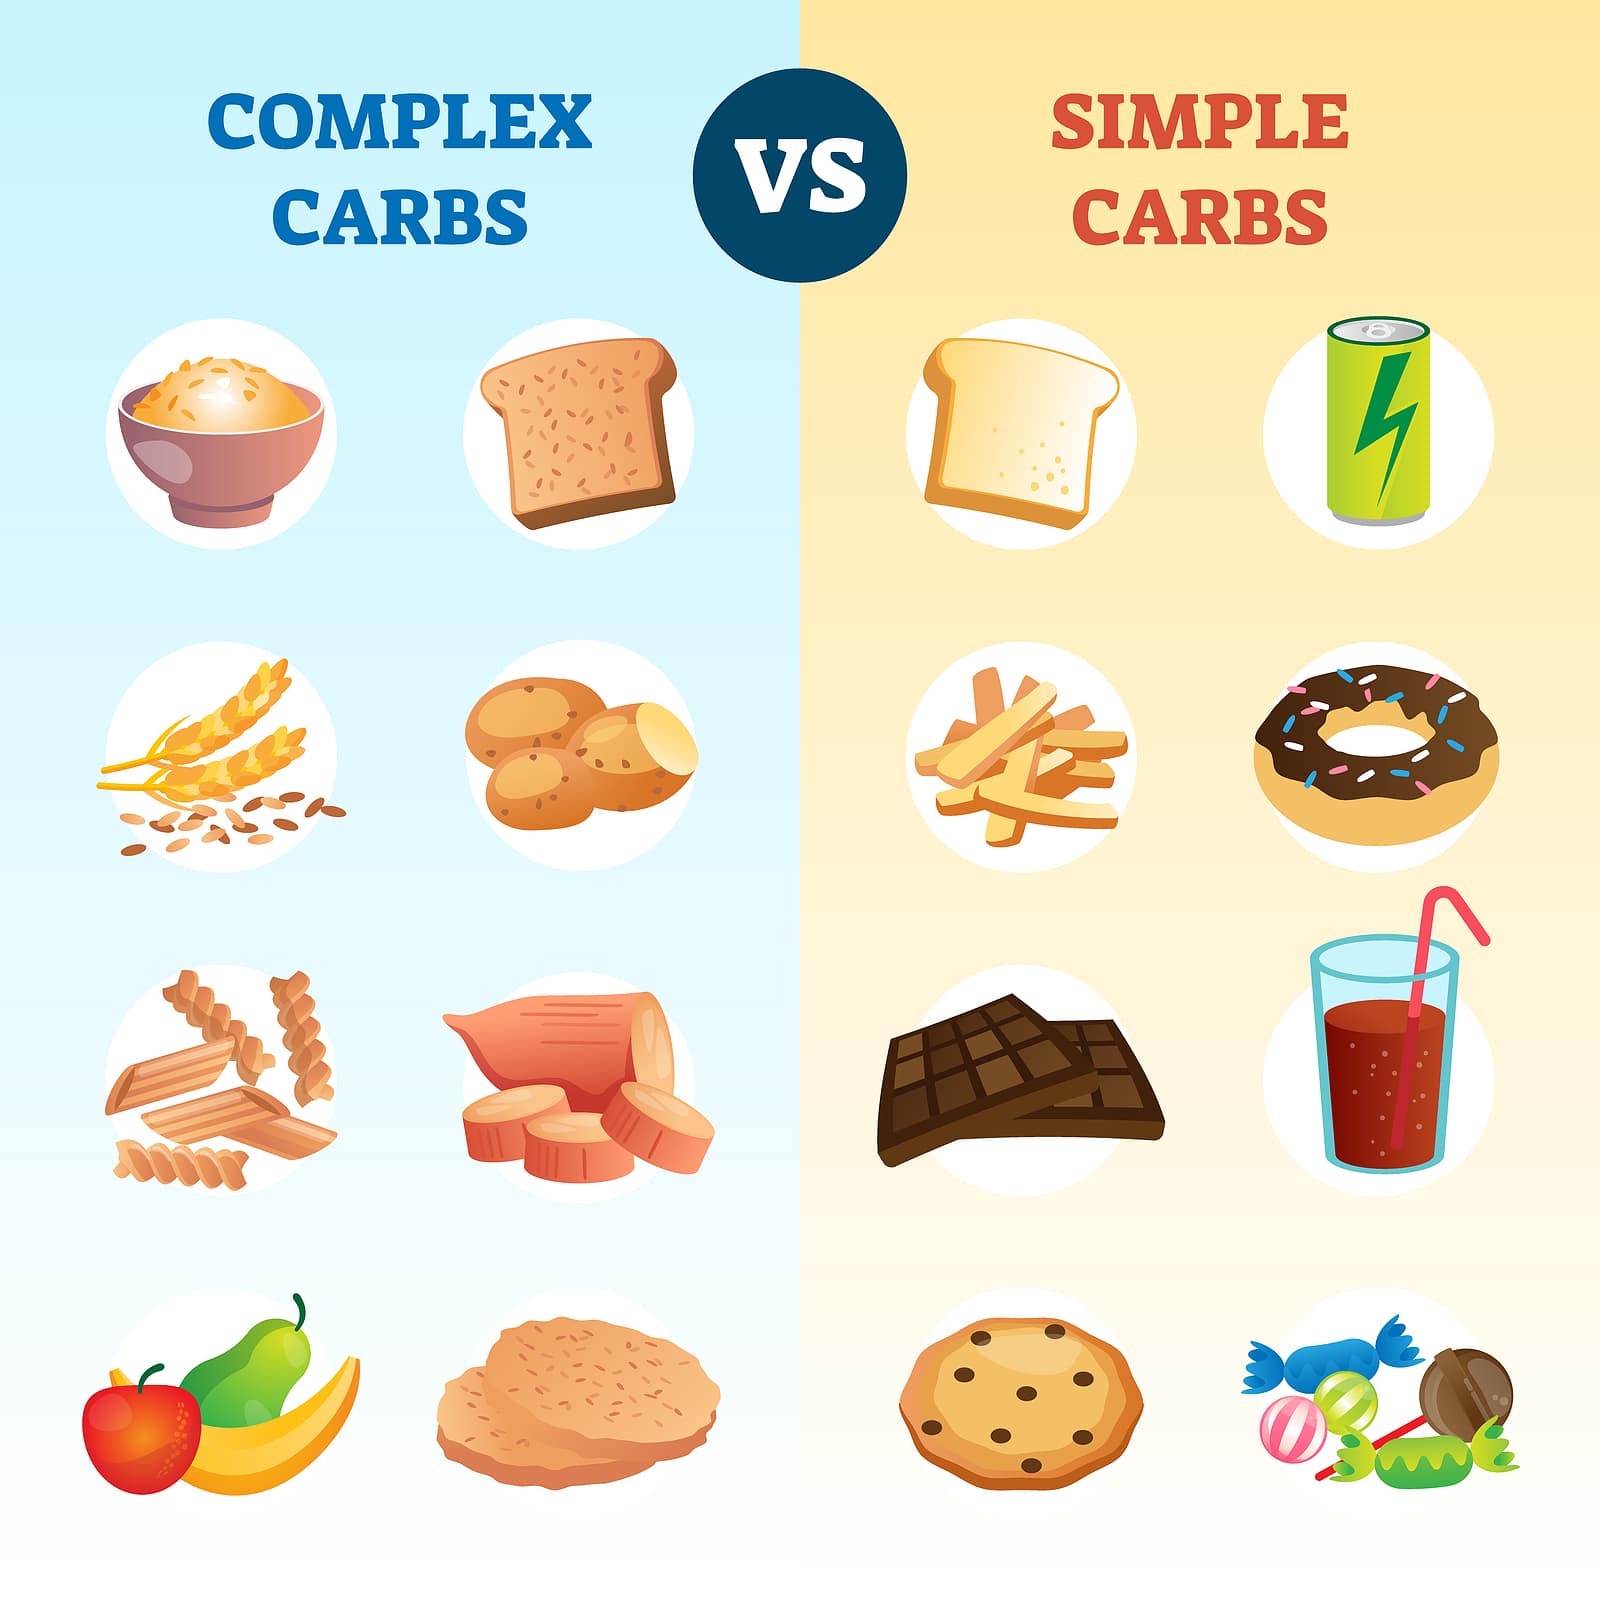 What is the difference between simple and complex carbohydrates?